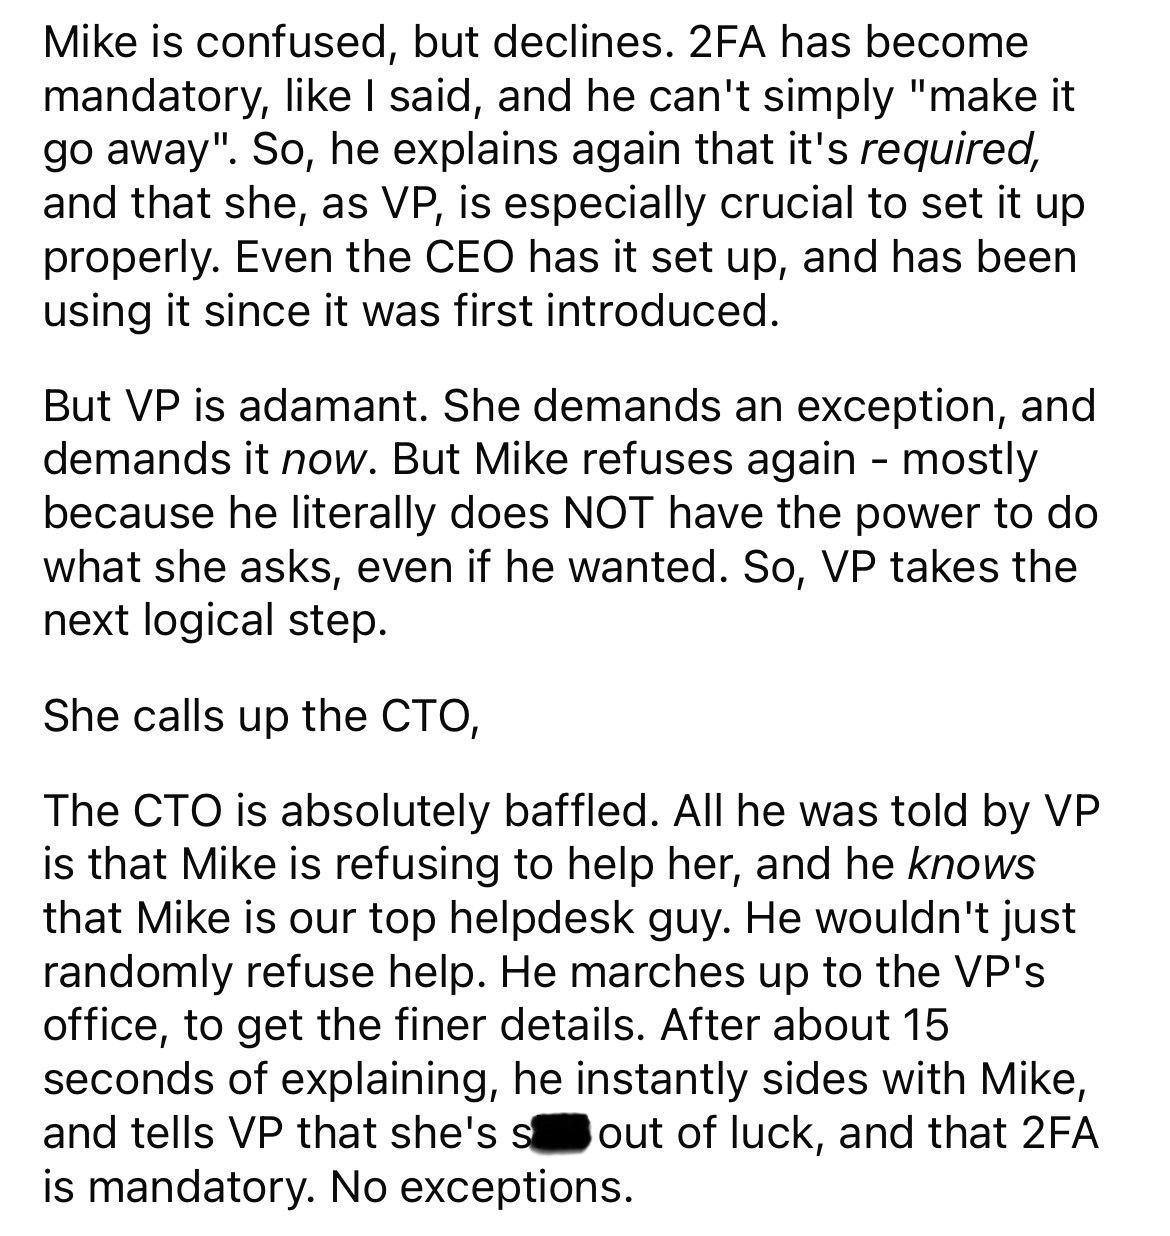 document - Mike is confused, but declines. 2FA has become mandatory, I said, and he can't simply "make it go away". So, he explains again that it's required, and that she, as Vp, is especially crucial to set it up properly. Even the Ceo has it set up, and